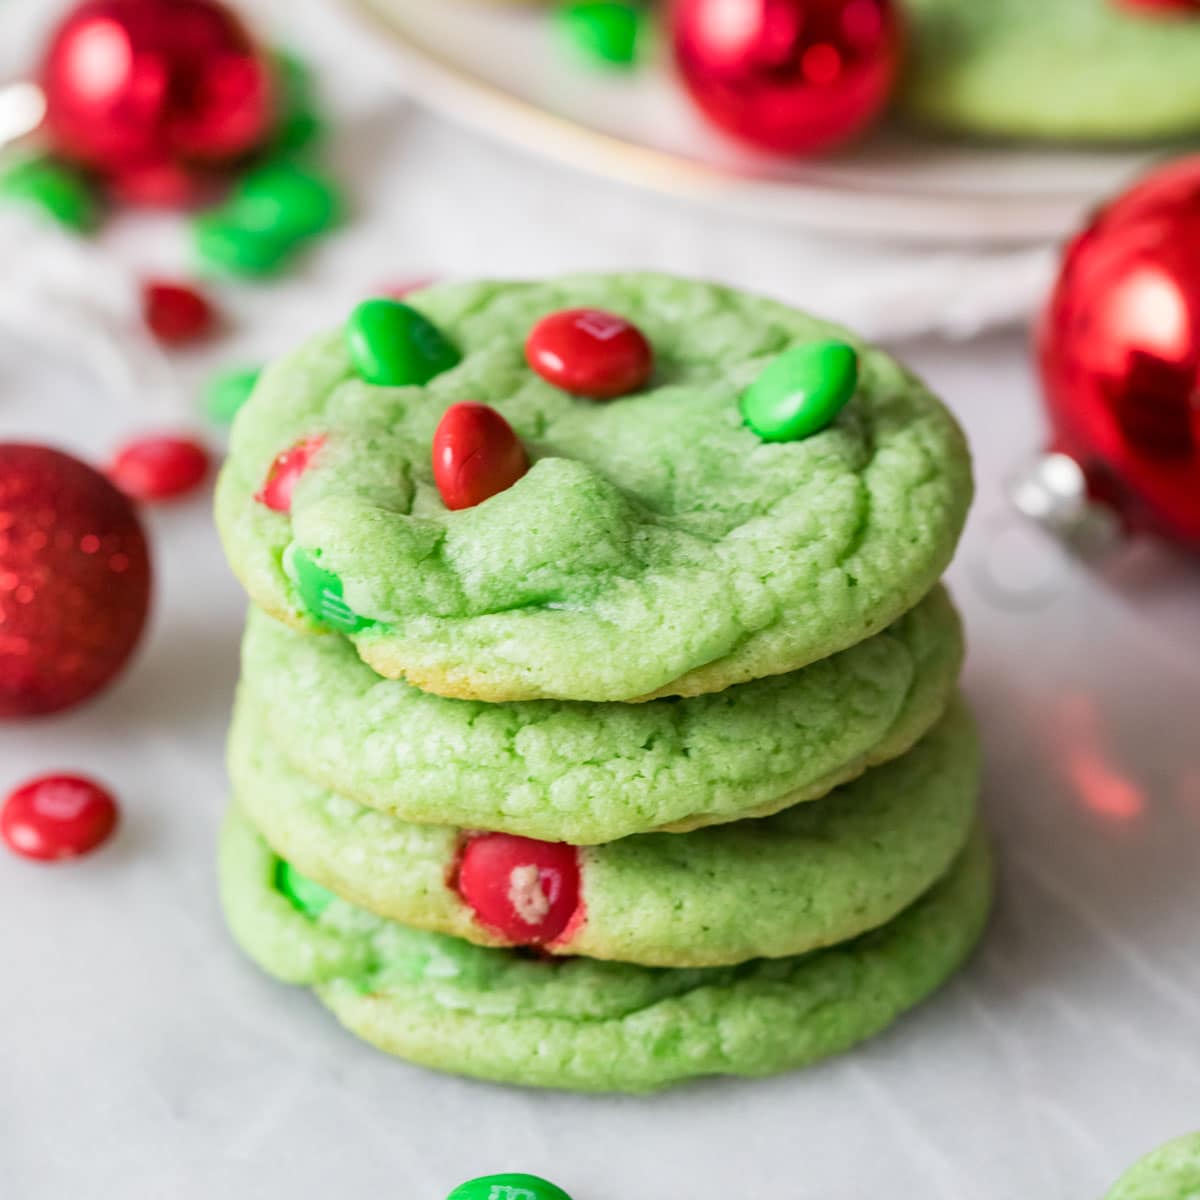 The Grinch Christmas Cookies The Grinch Christmas Cookies